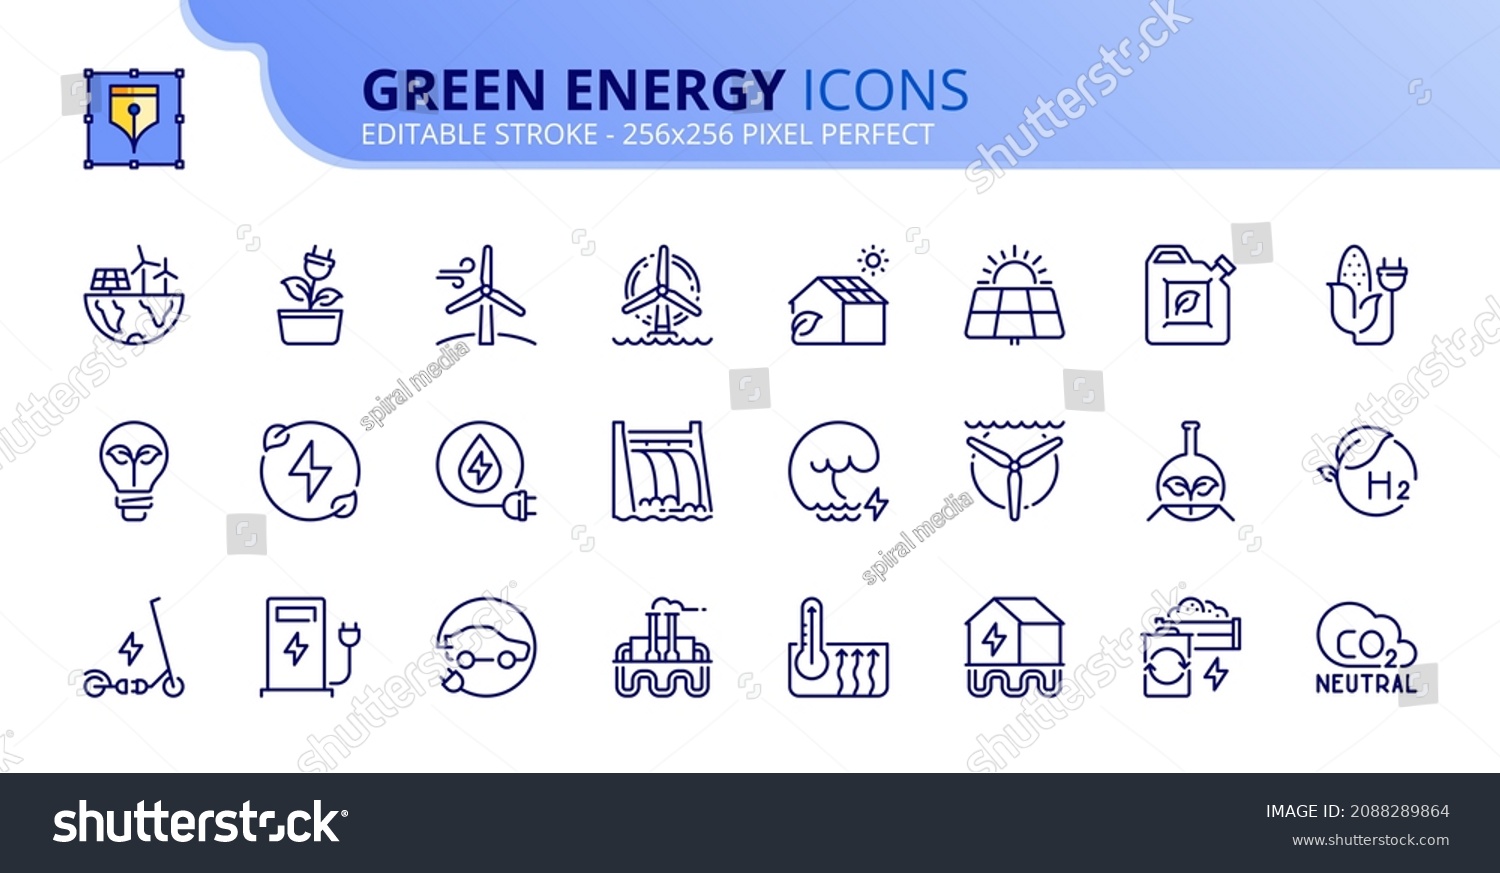 SVG of Outline icons about green energy. Ecology concept. Contains such icons as CO2 neutral, solar, geothermal and wind energy, hydropower, biofuel and biomass. Editable stroke Vector 256x256 pixel perfect svg